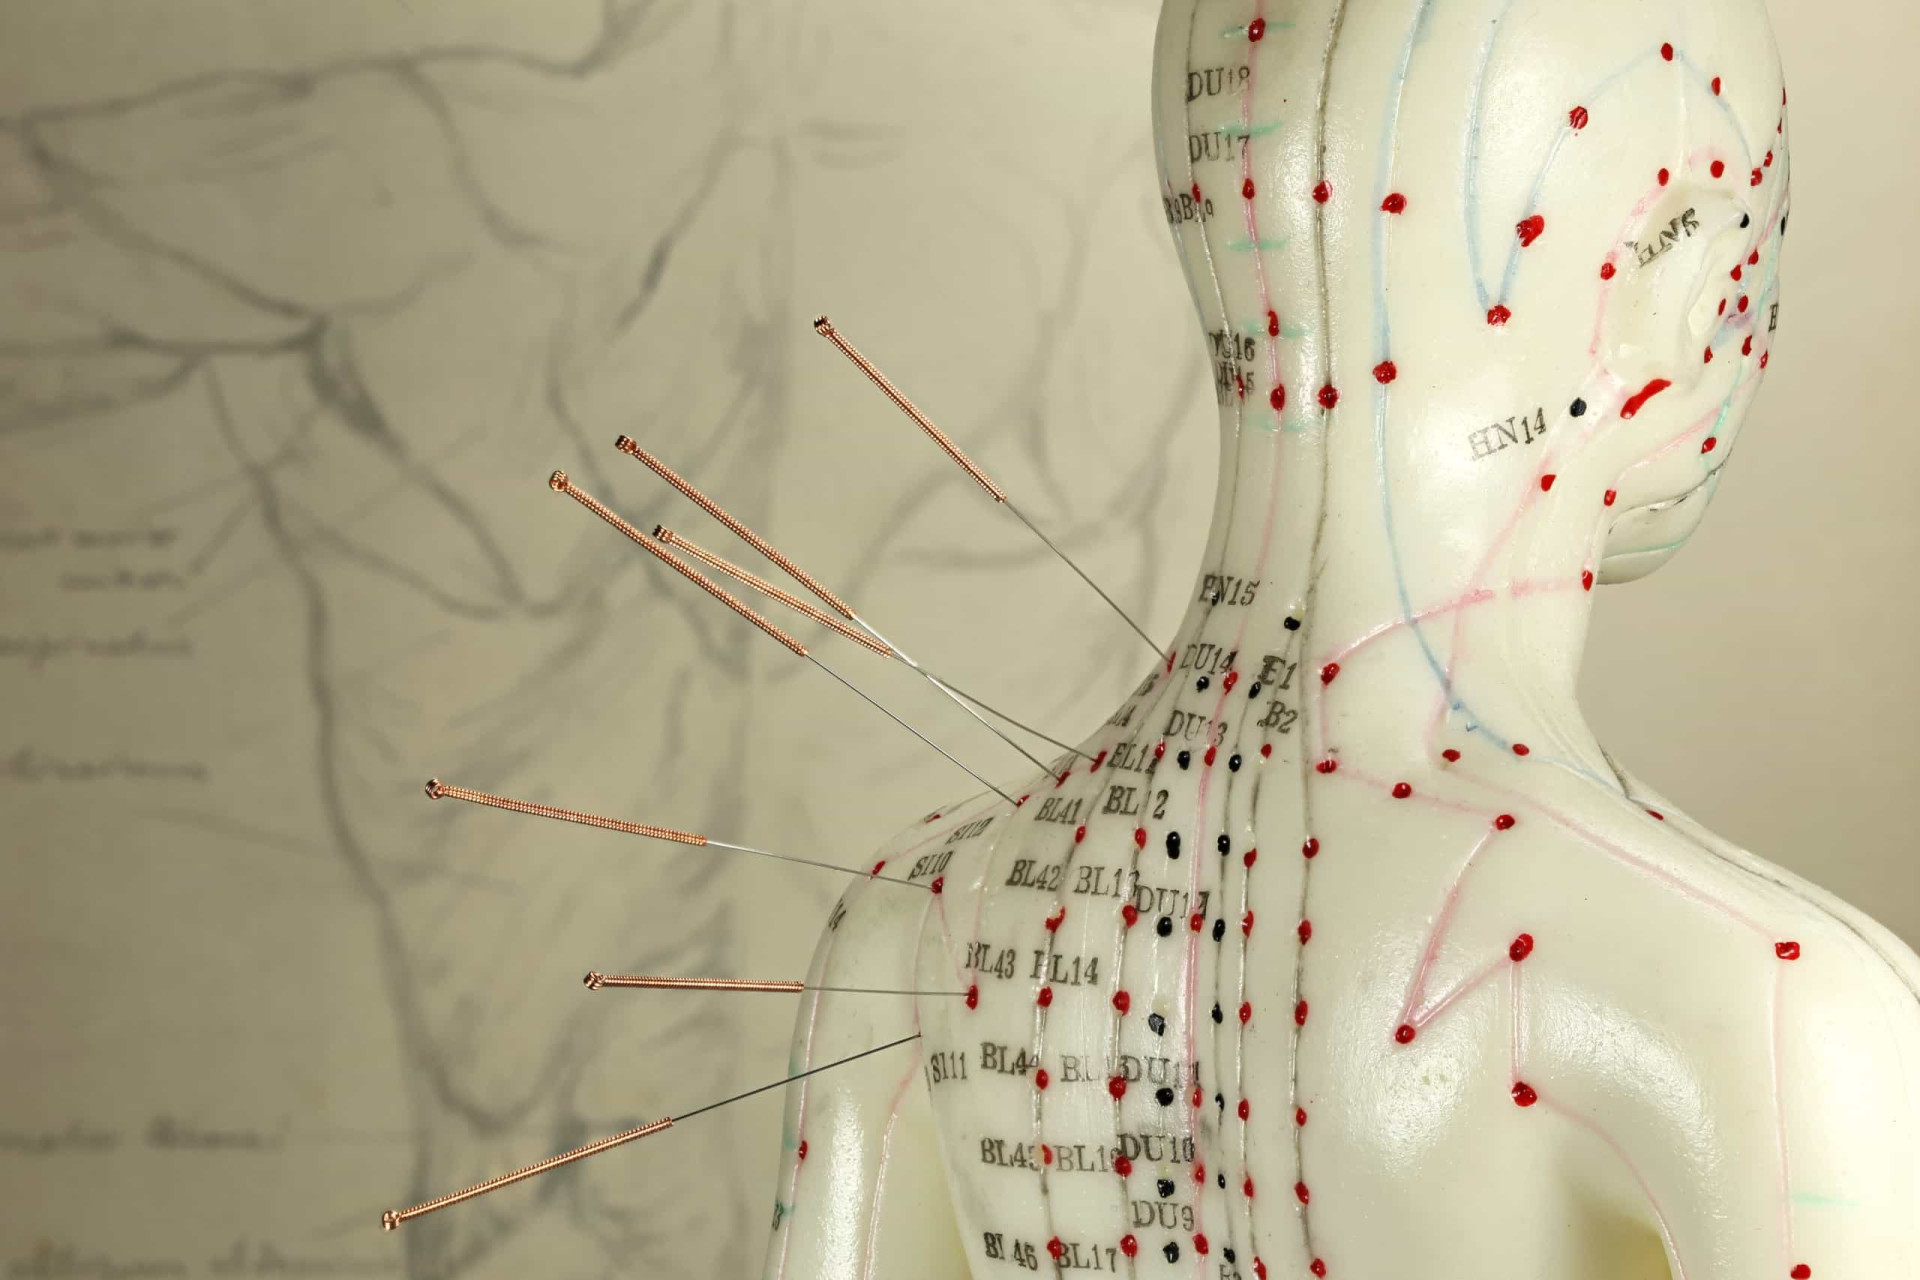 <p>When an area of the body is out of balance, it can affect you in multiple ways. Acupuncture relieves multiple symptoms all in one treatment, while also correcting the root cause.</p><p><a href="https://www.msn.com/en-us/community/channel/vid-7xx8mnucu55yw63we9va2gwr7uihbxwc68fxqp25x6tg4ftibpra?cvid=94631541bc0f4f89bfd59158d696ad7e">Follow us and access great exclusive content every day</a></p>